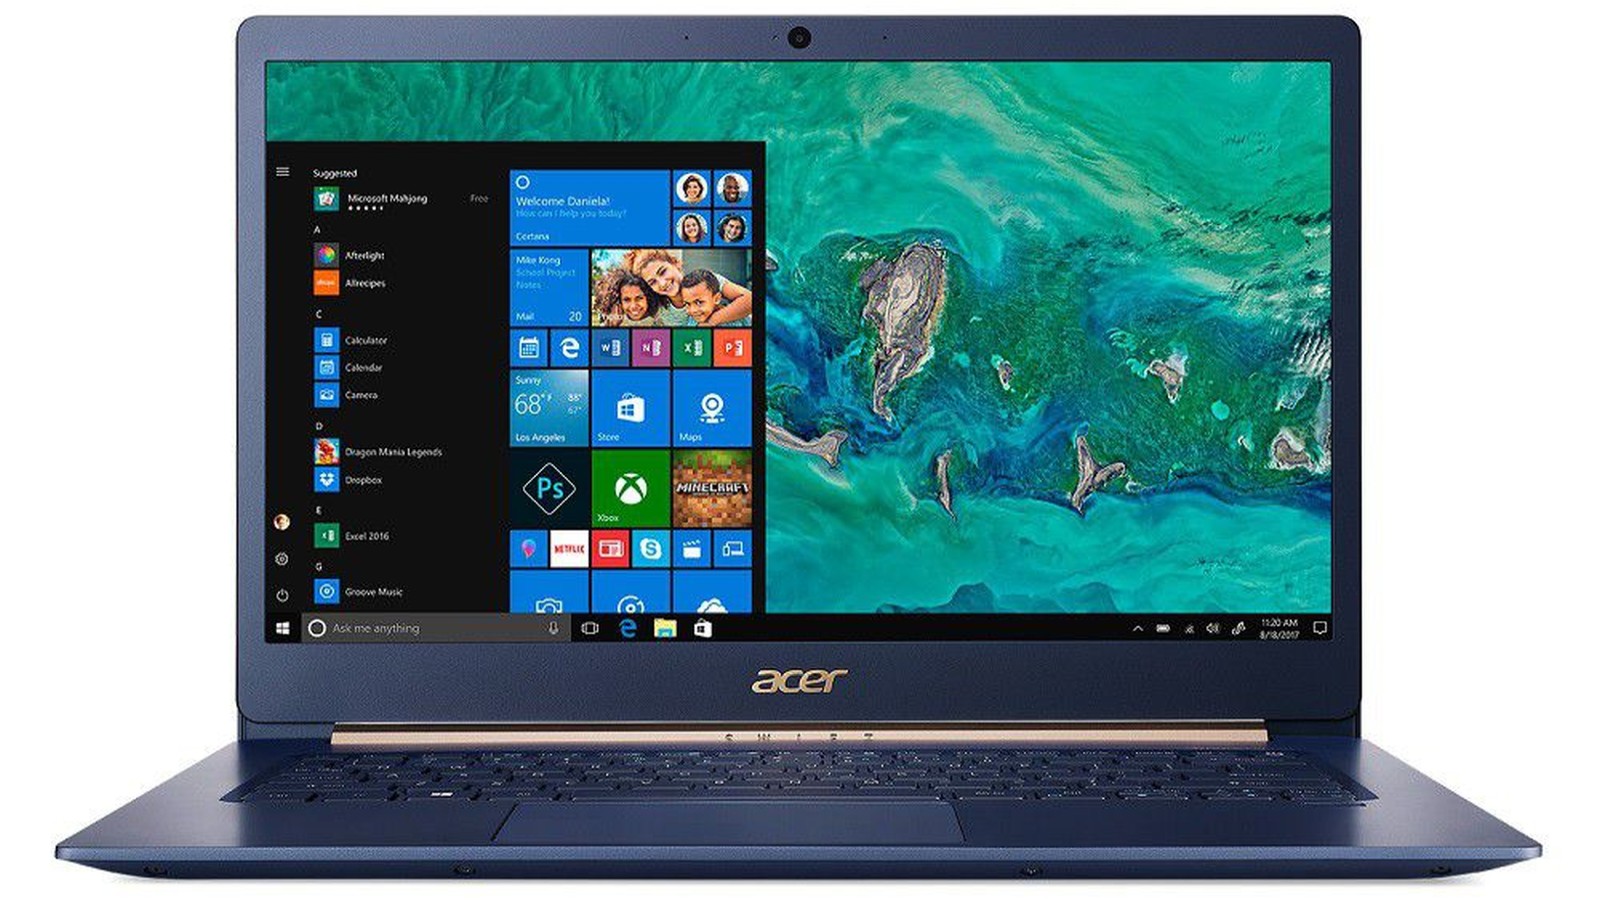 Acer Swift 5 Review A Stylish Lack Of Substance Gearburn February 17, 2021 by admin. acer swift 5 review a stylish lack of